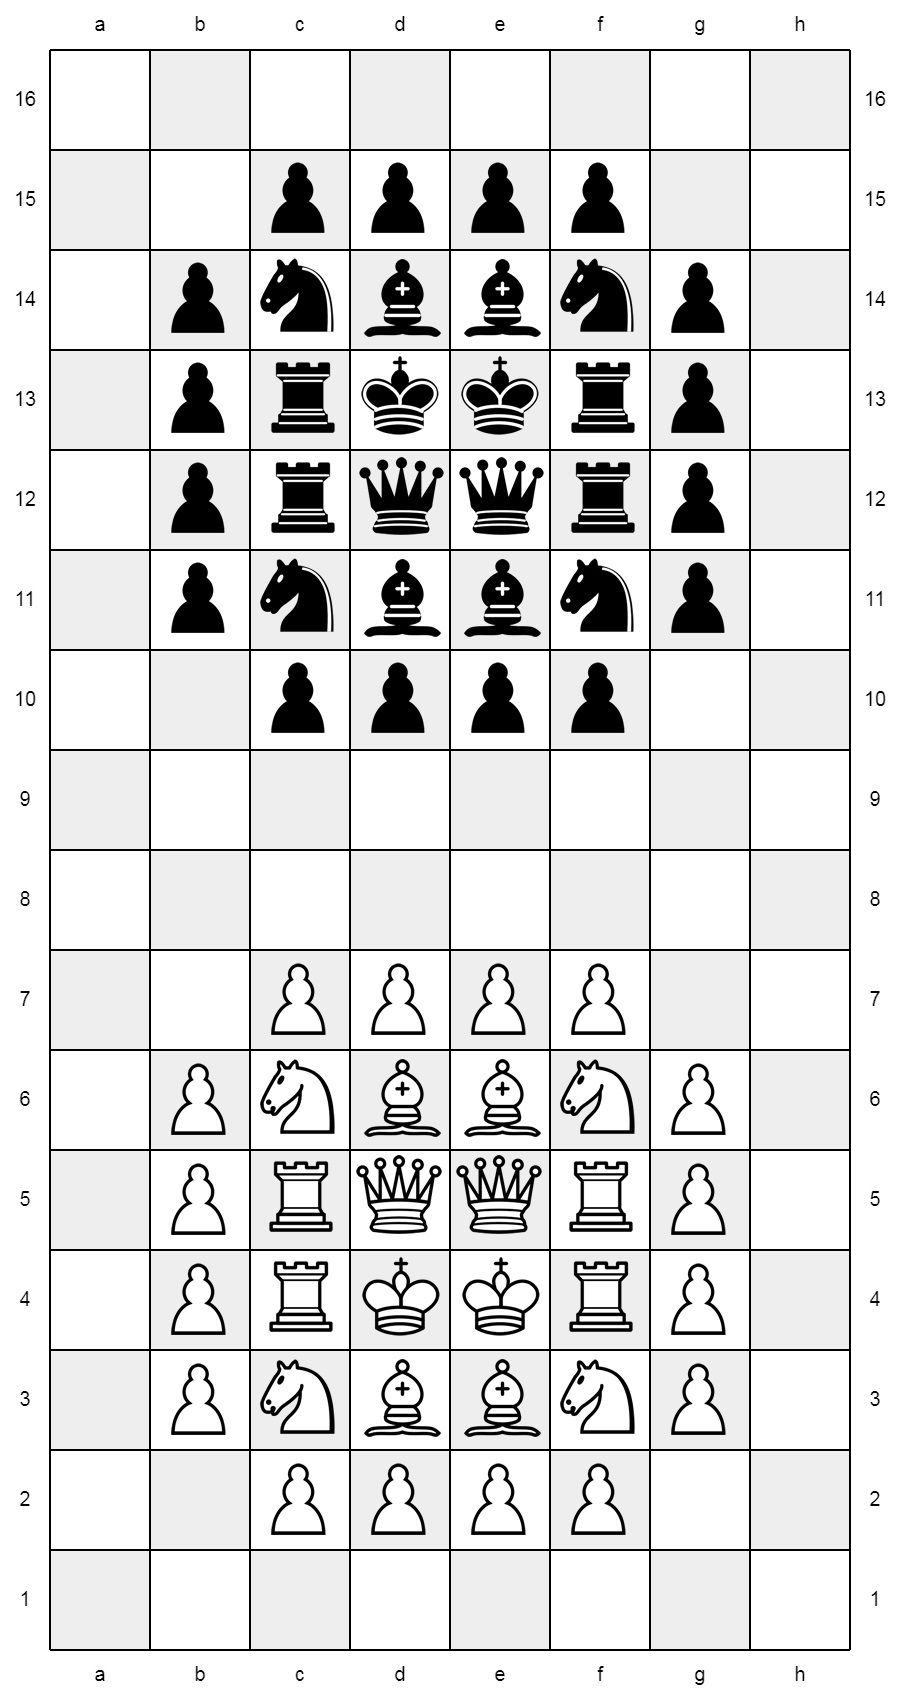 Did analysis rules change? - Chess Forums 